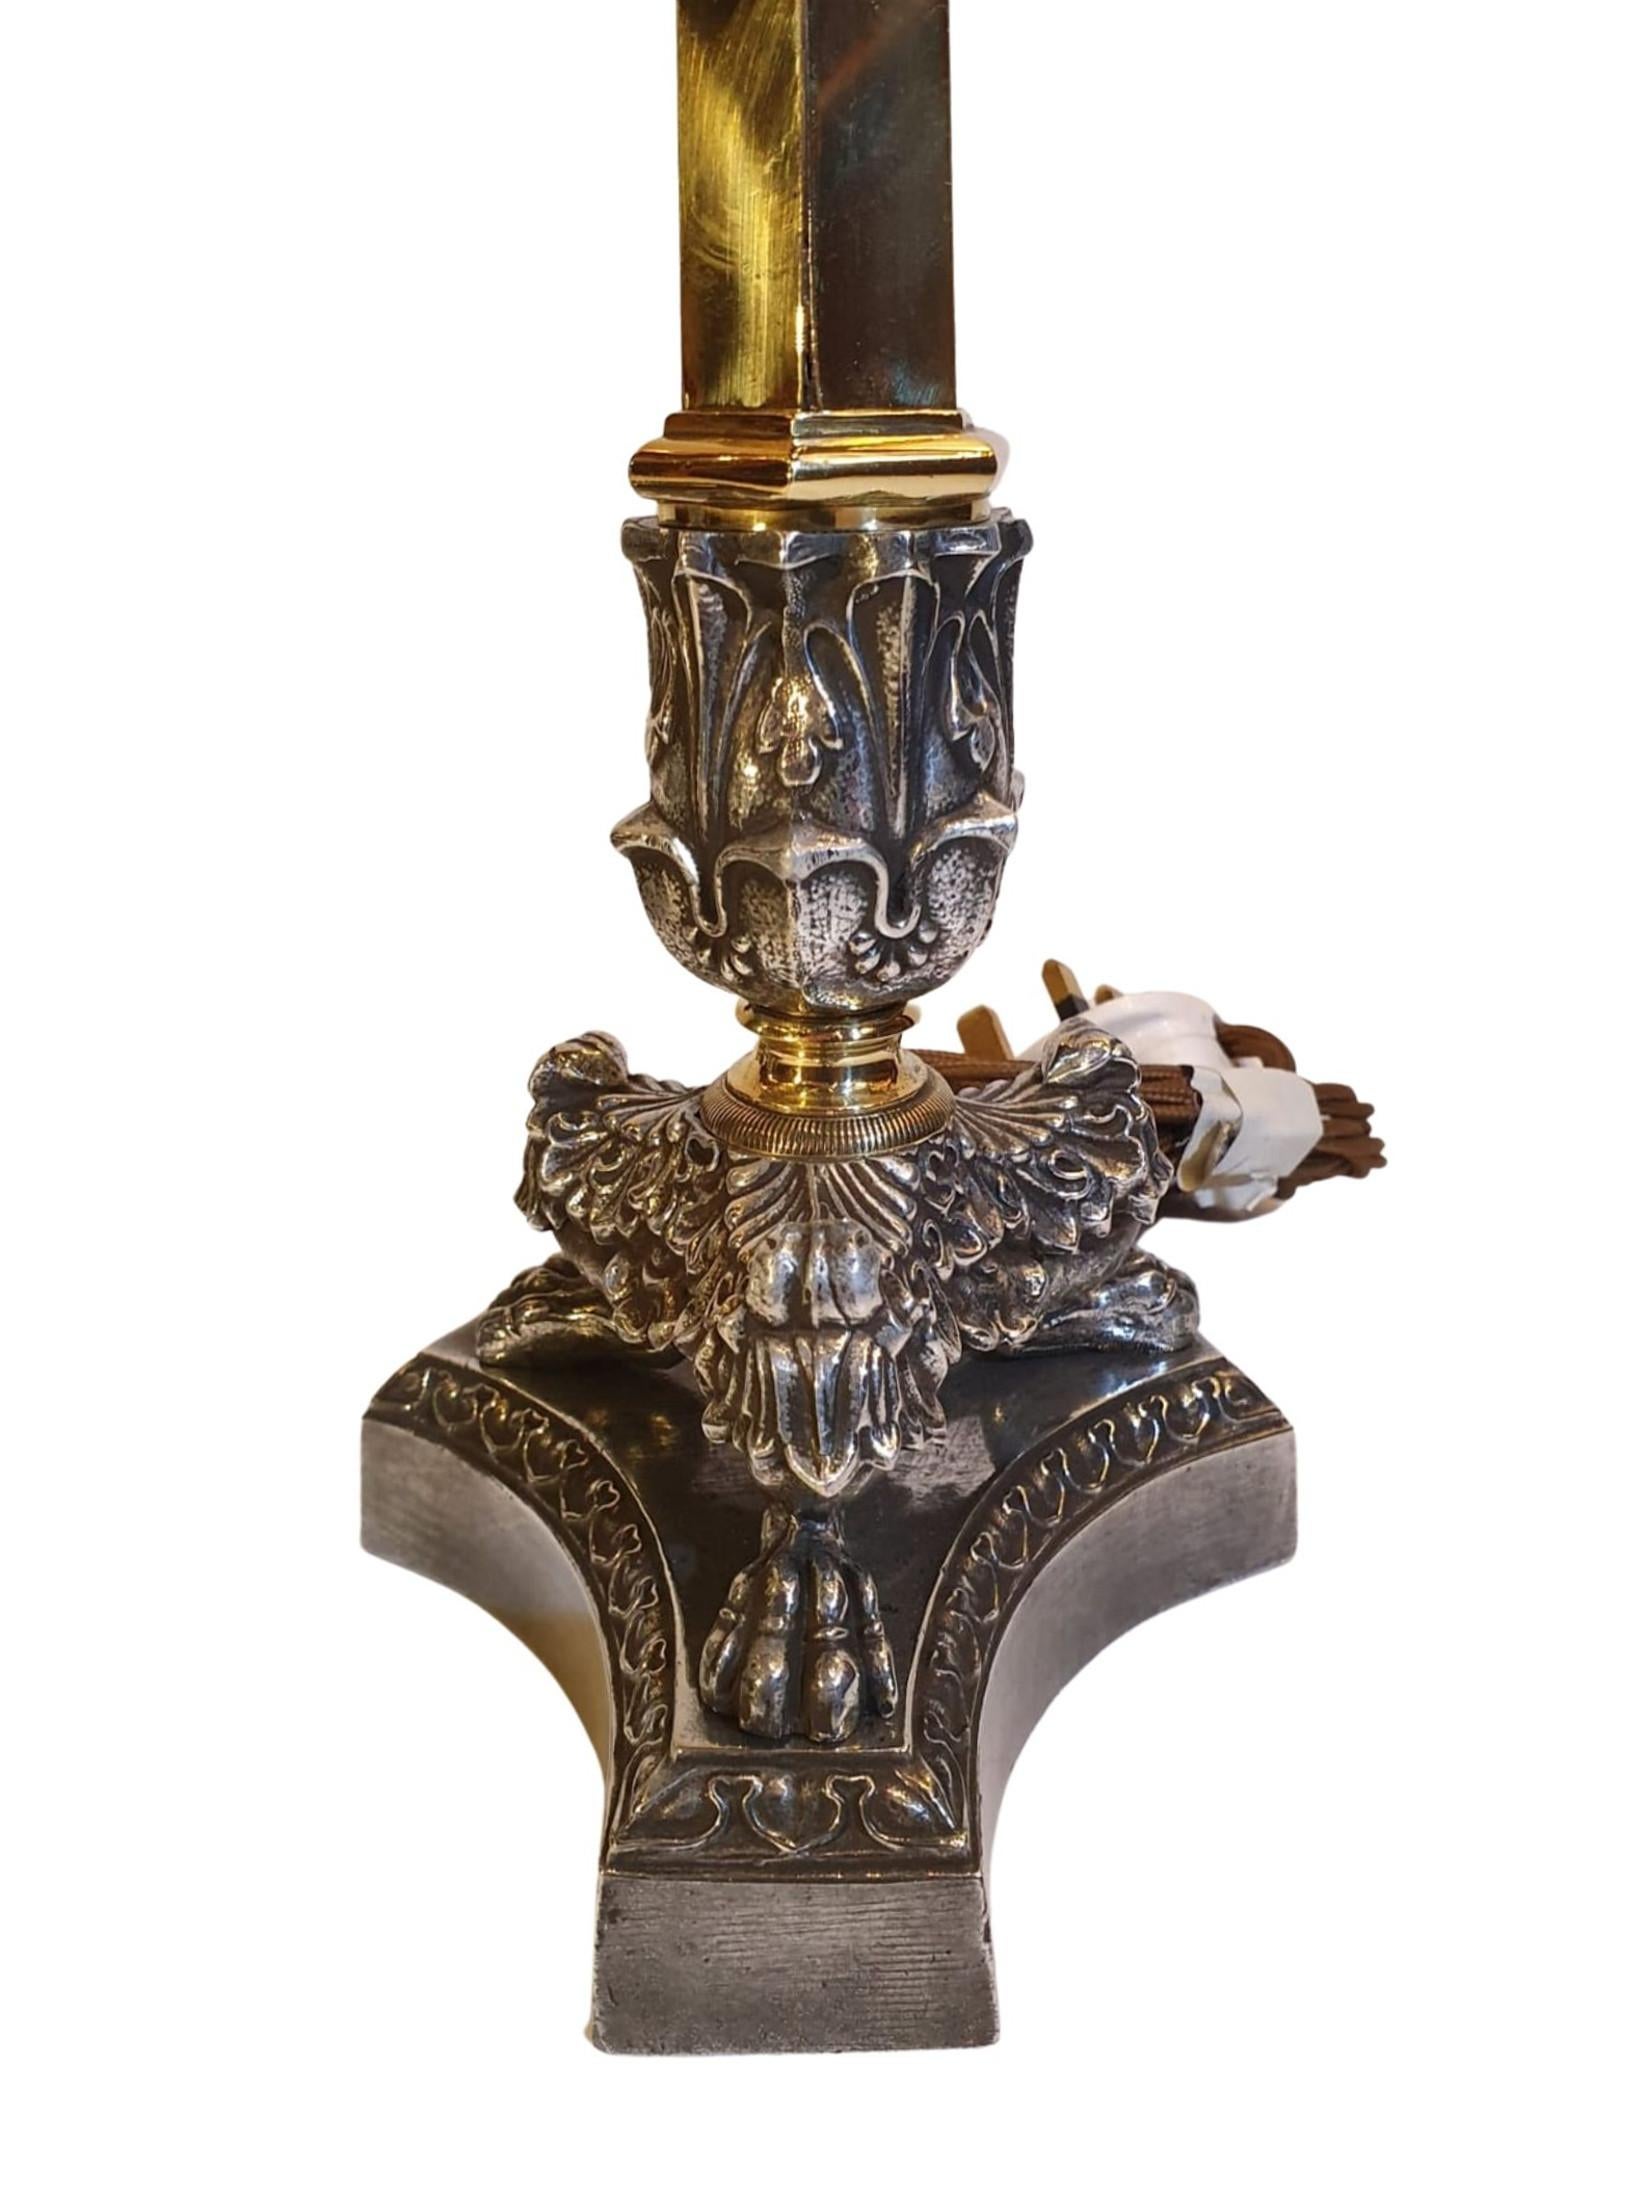 A stunning pair of 19th century Empire style candlesticks in brass and pol-ished steel converted to table lamps. Beautifully decorated with ornate acanthus leaf motif detail raised over hexagon columnar stem with scroll and foliate motif detail at